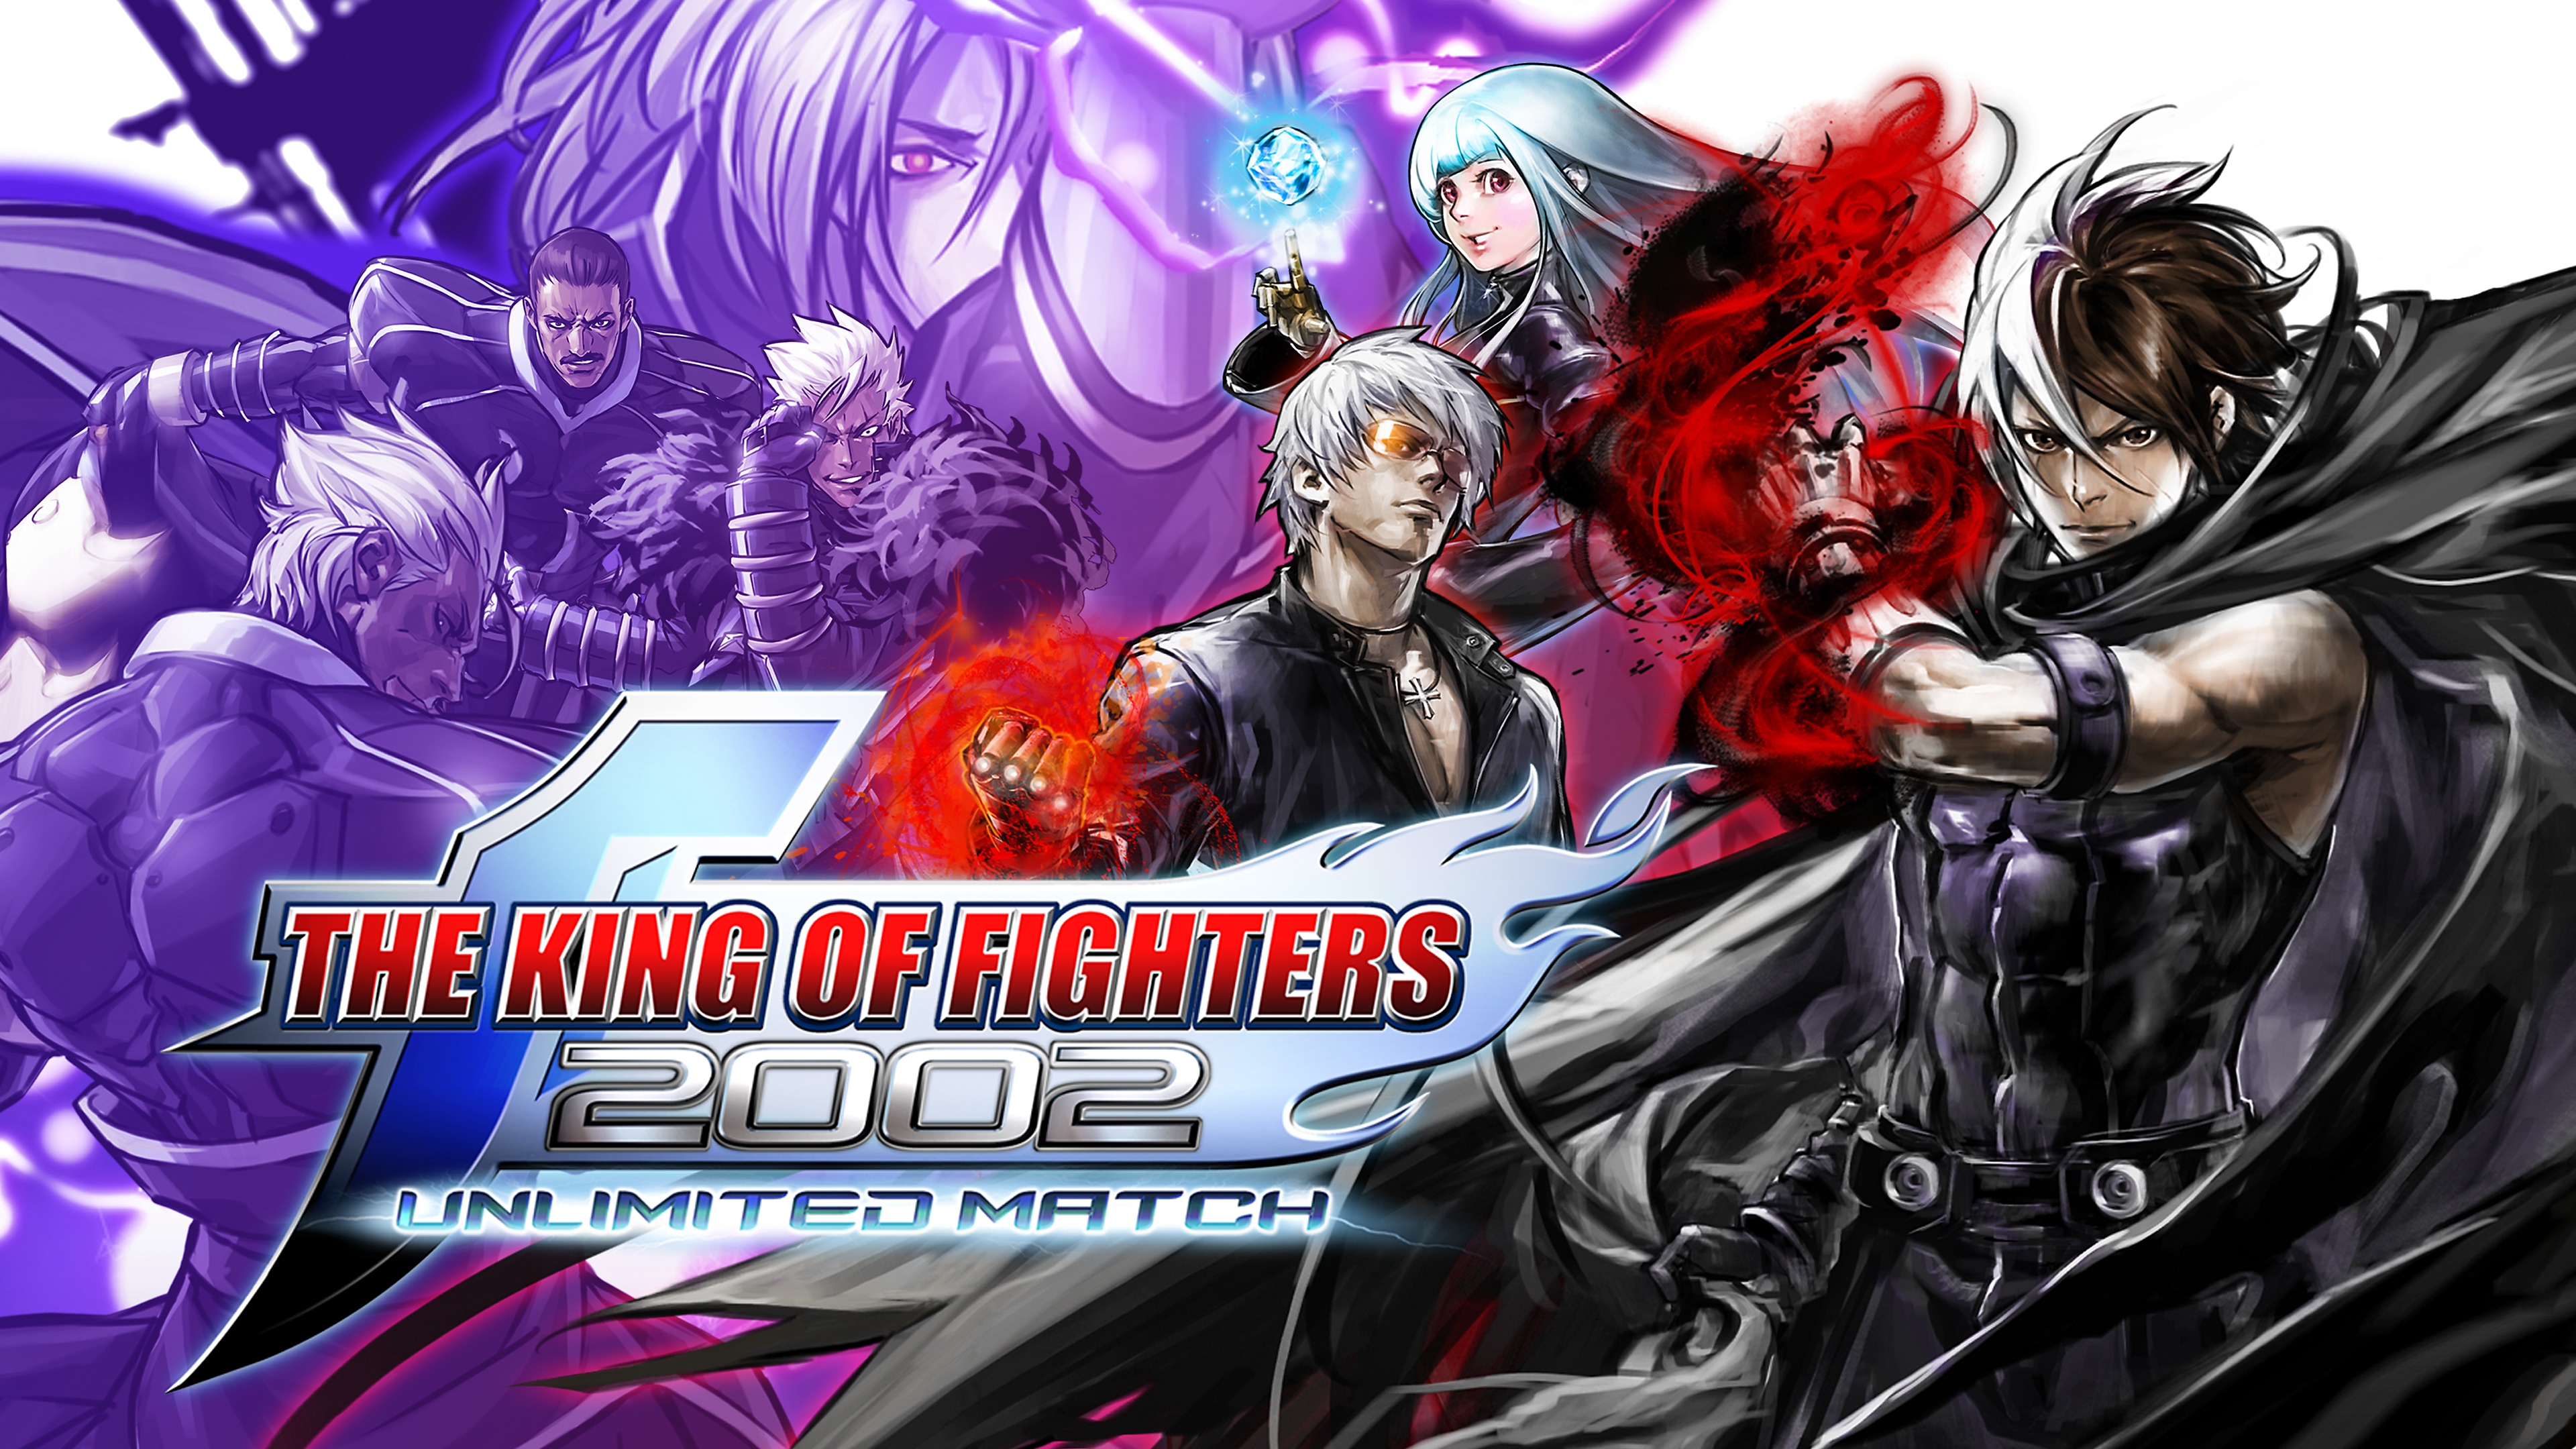 The King of Fighters 2002 - Unlimited Match キーアート